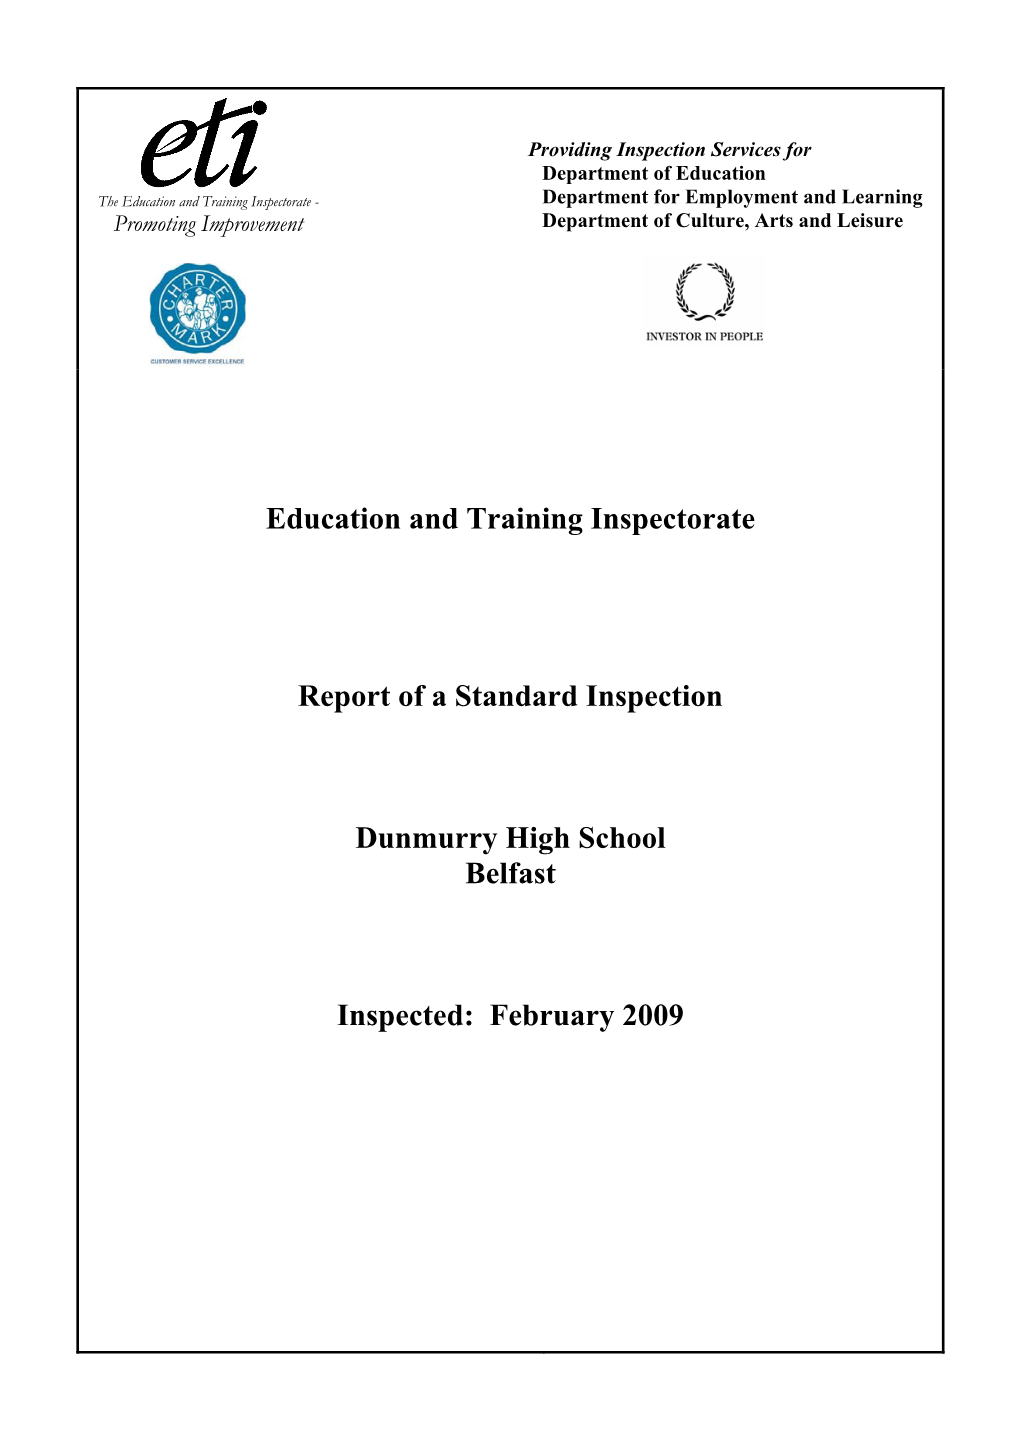 Education and Training Inspectorate Report of a Standard Inspection Dunmurry High School Belfast Inspected: February 2009